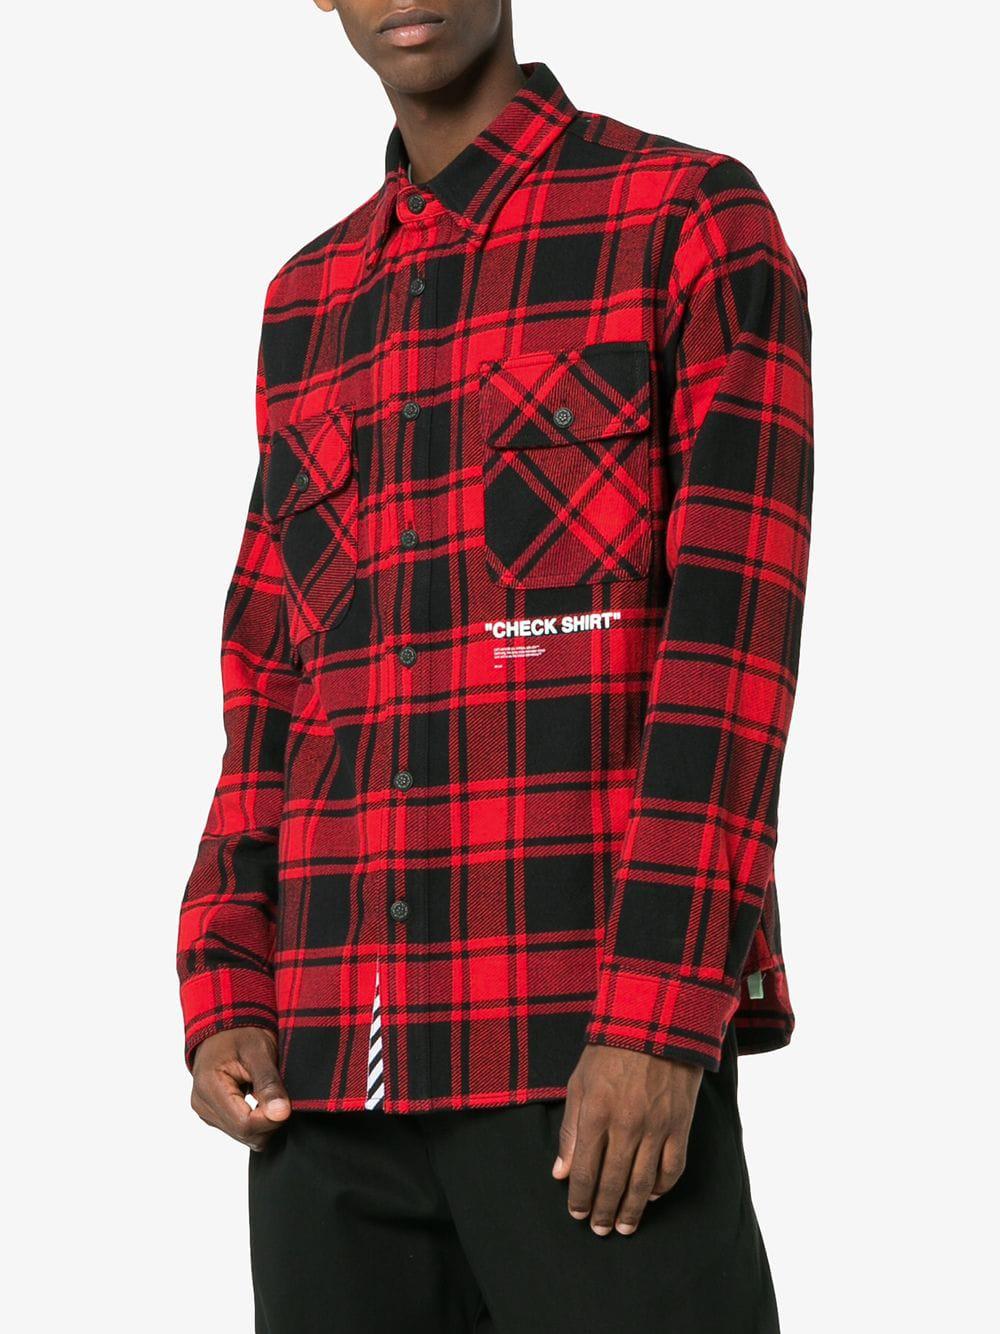 uvidenhed Steward Guggenheim Museum Off-White c/o Virgil Abloh Cotton Ssense Exclusive Red Quote Flannel Shirt  for Men - Lyst